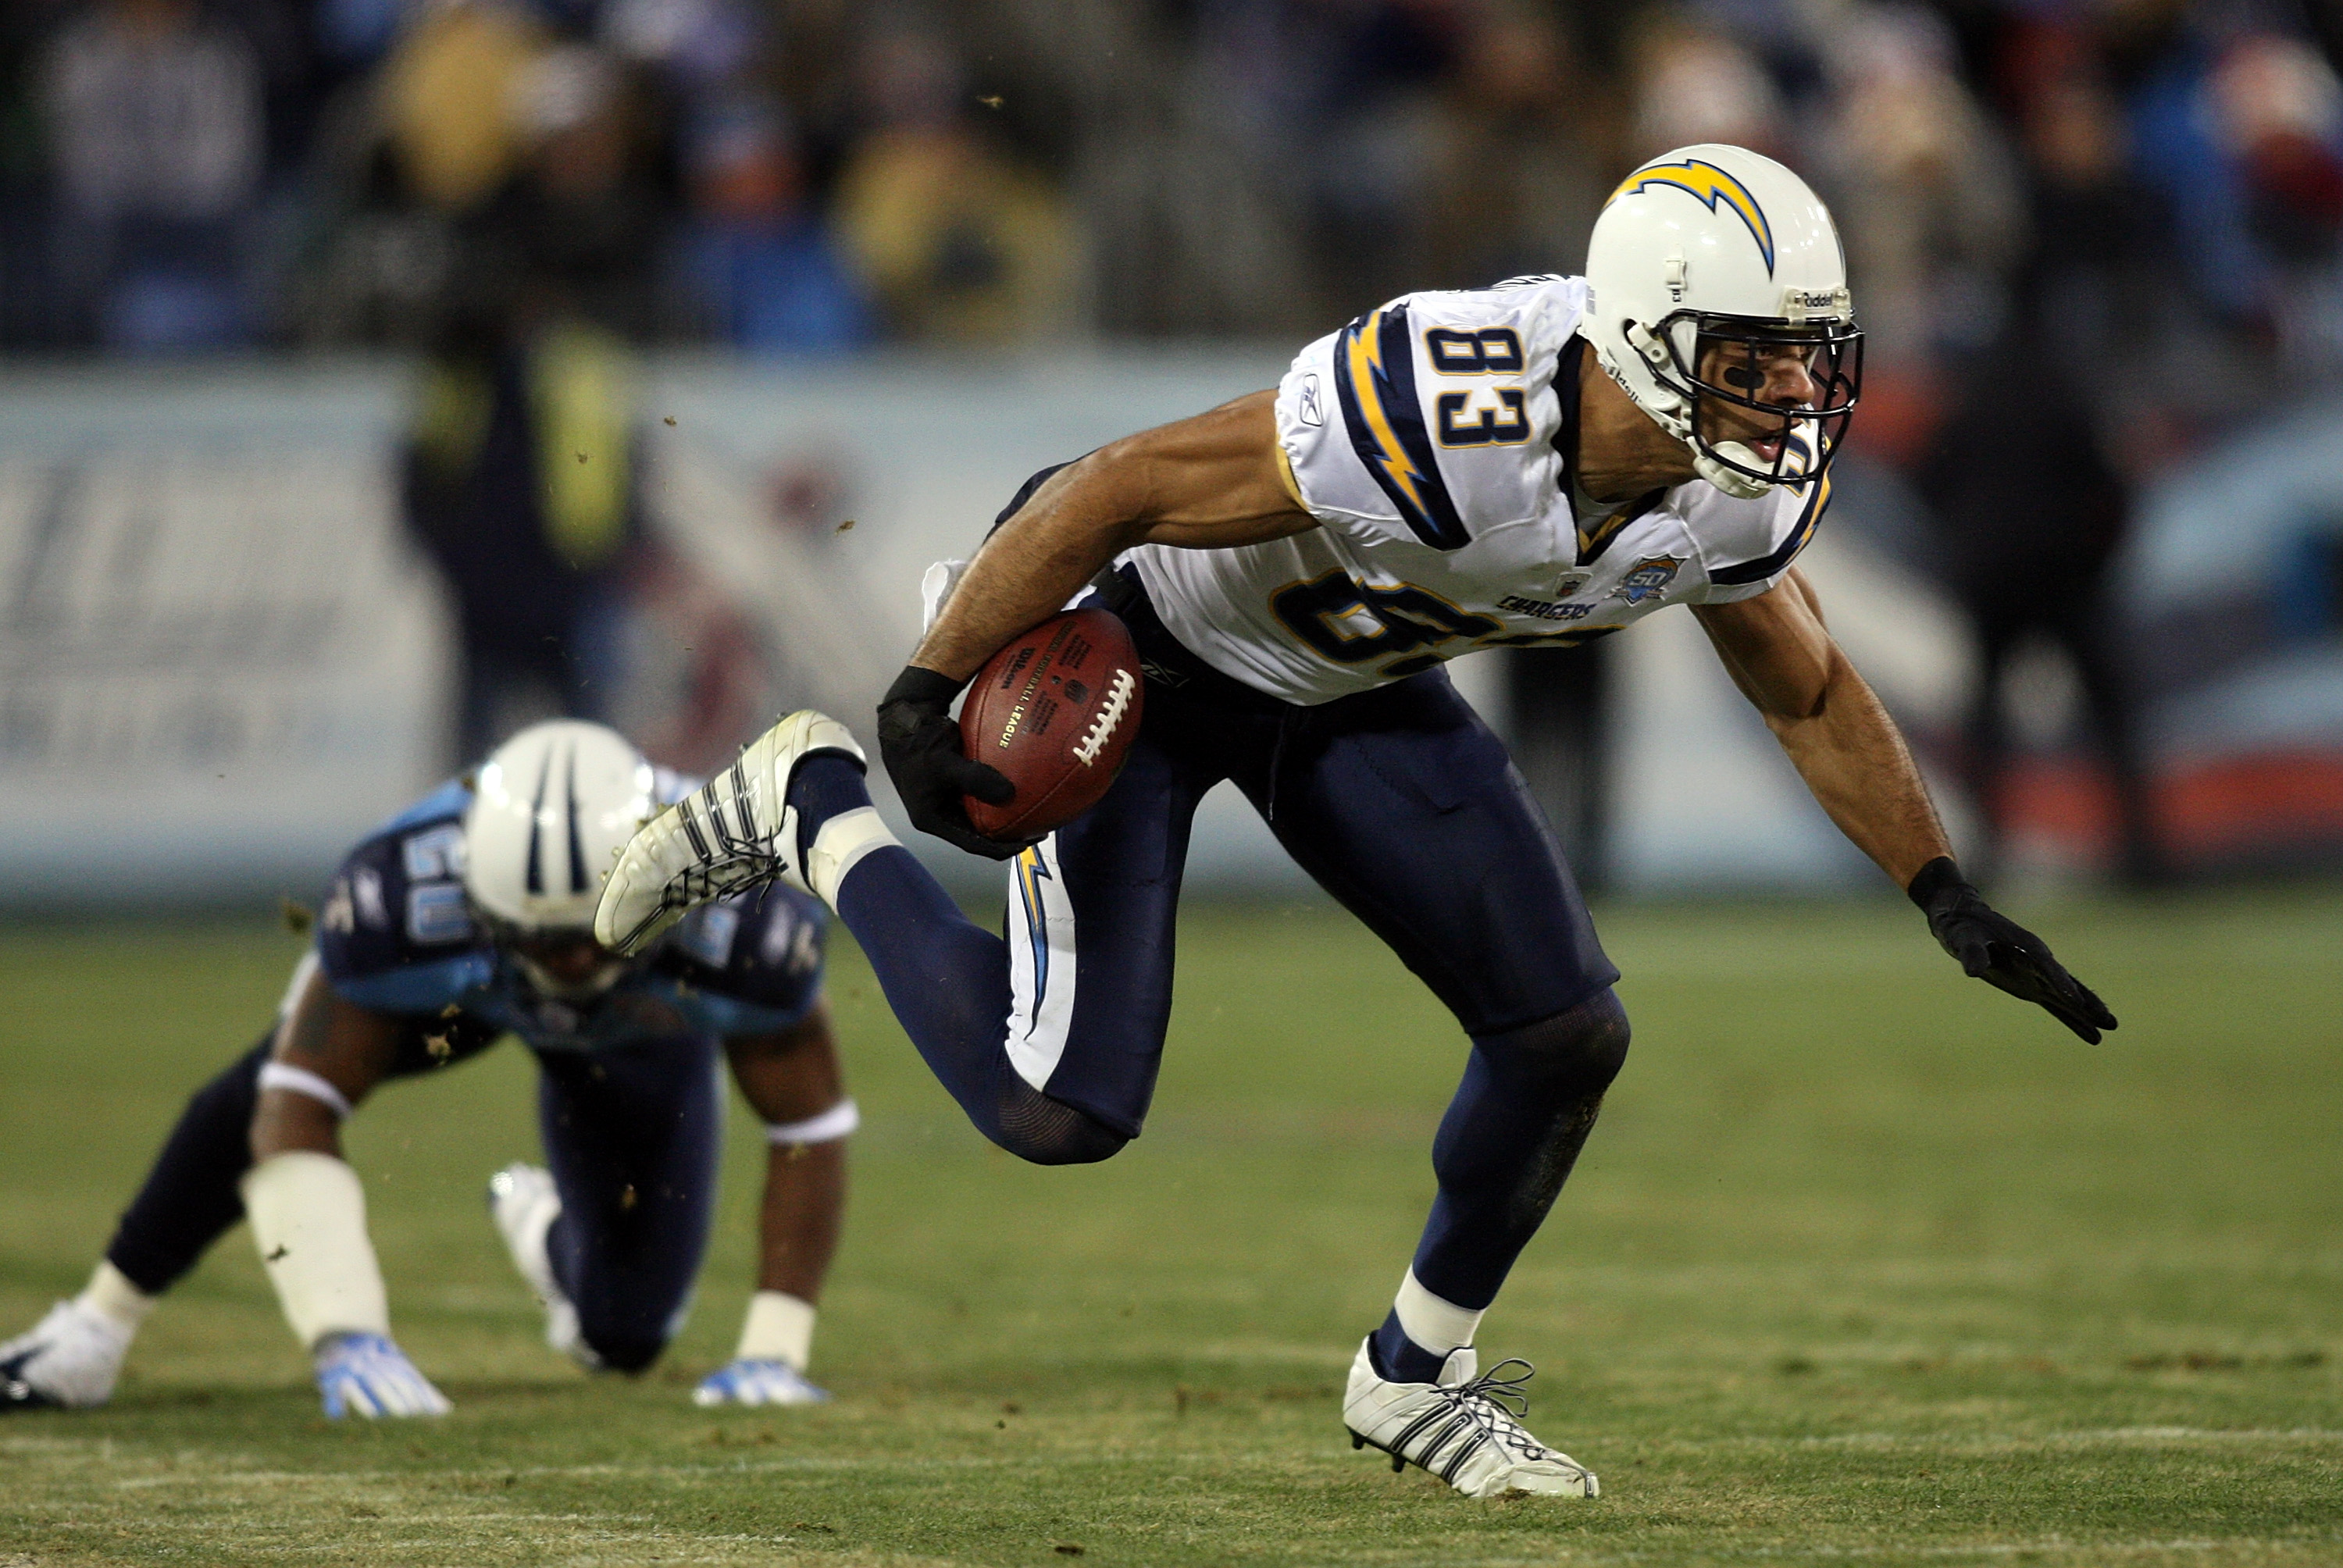 NASHVILLE, TN - DECEMBER 25: Vincent Jackson #83 of the San Diego Chargers picks up a first down against the Tennessee Titans on December 25, 2009 at LP Field in Nashville, Tennessee. (Photo by Rex Brown/Getty Images)